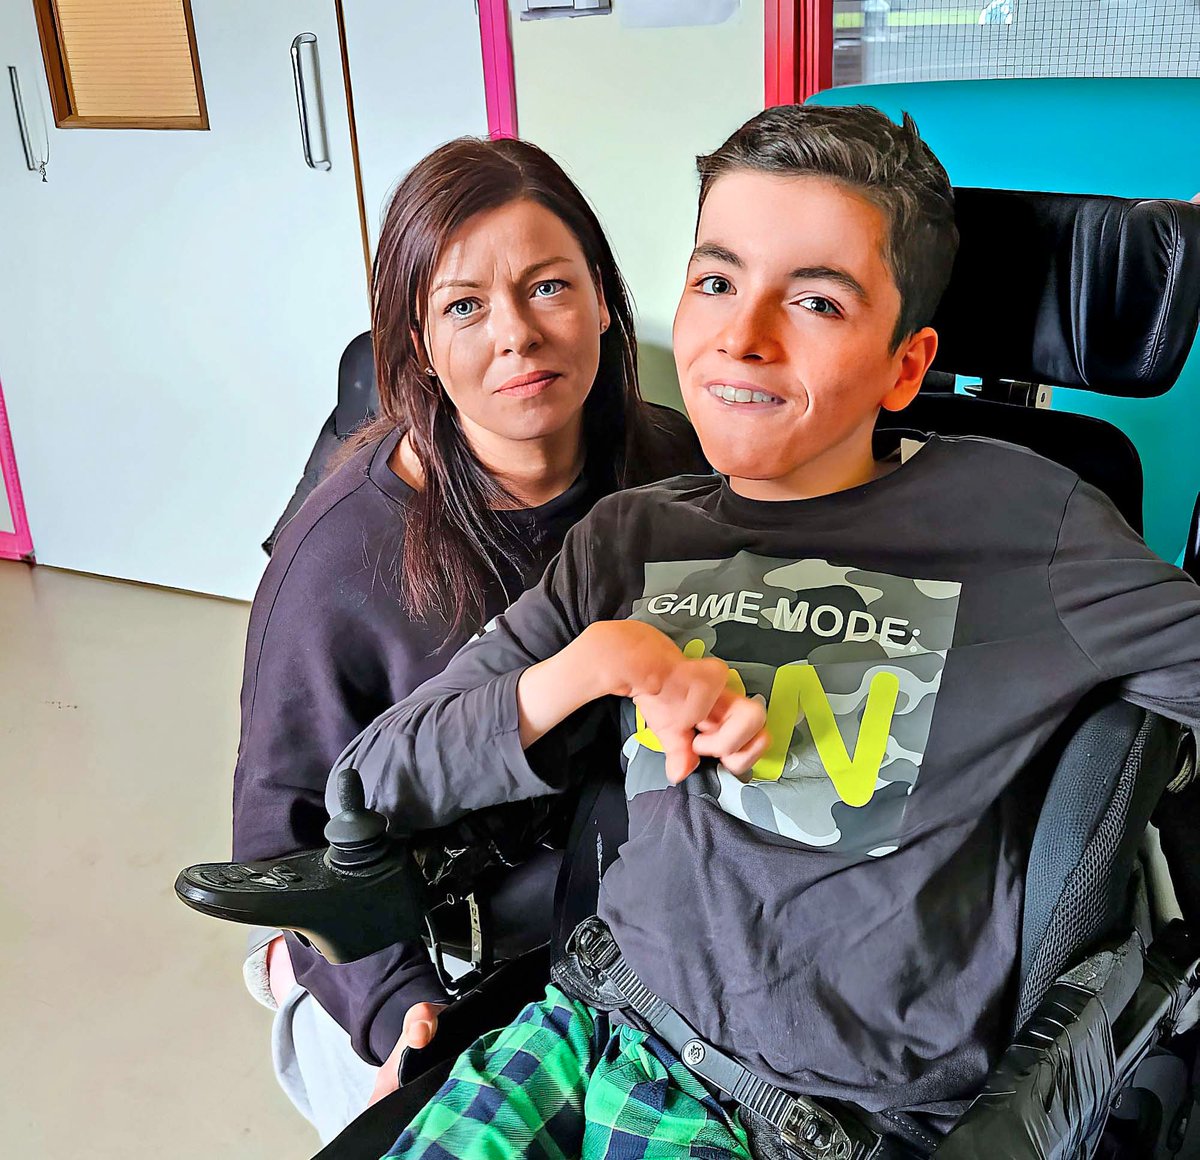 Urgent spinal surgery on 13-year-old Fossa boy Liam Dennehy Quinn is finally due to go ahead this Thursday, at the Crumlin Children’s Hospital in Dublin. Read the full story in tomorrow’s Kerry’s Eye